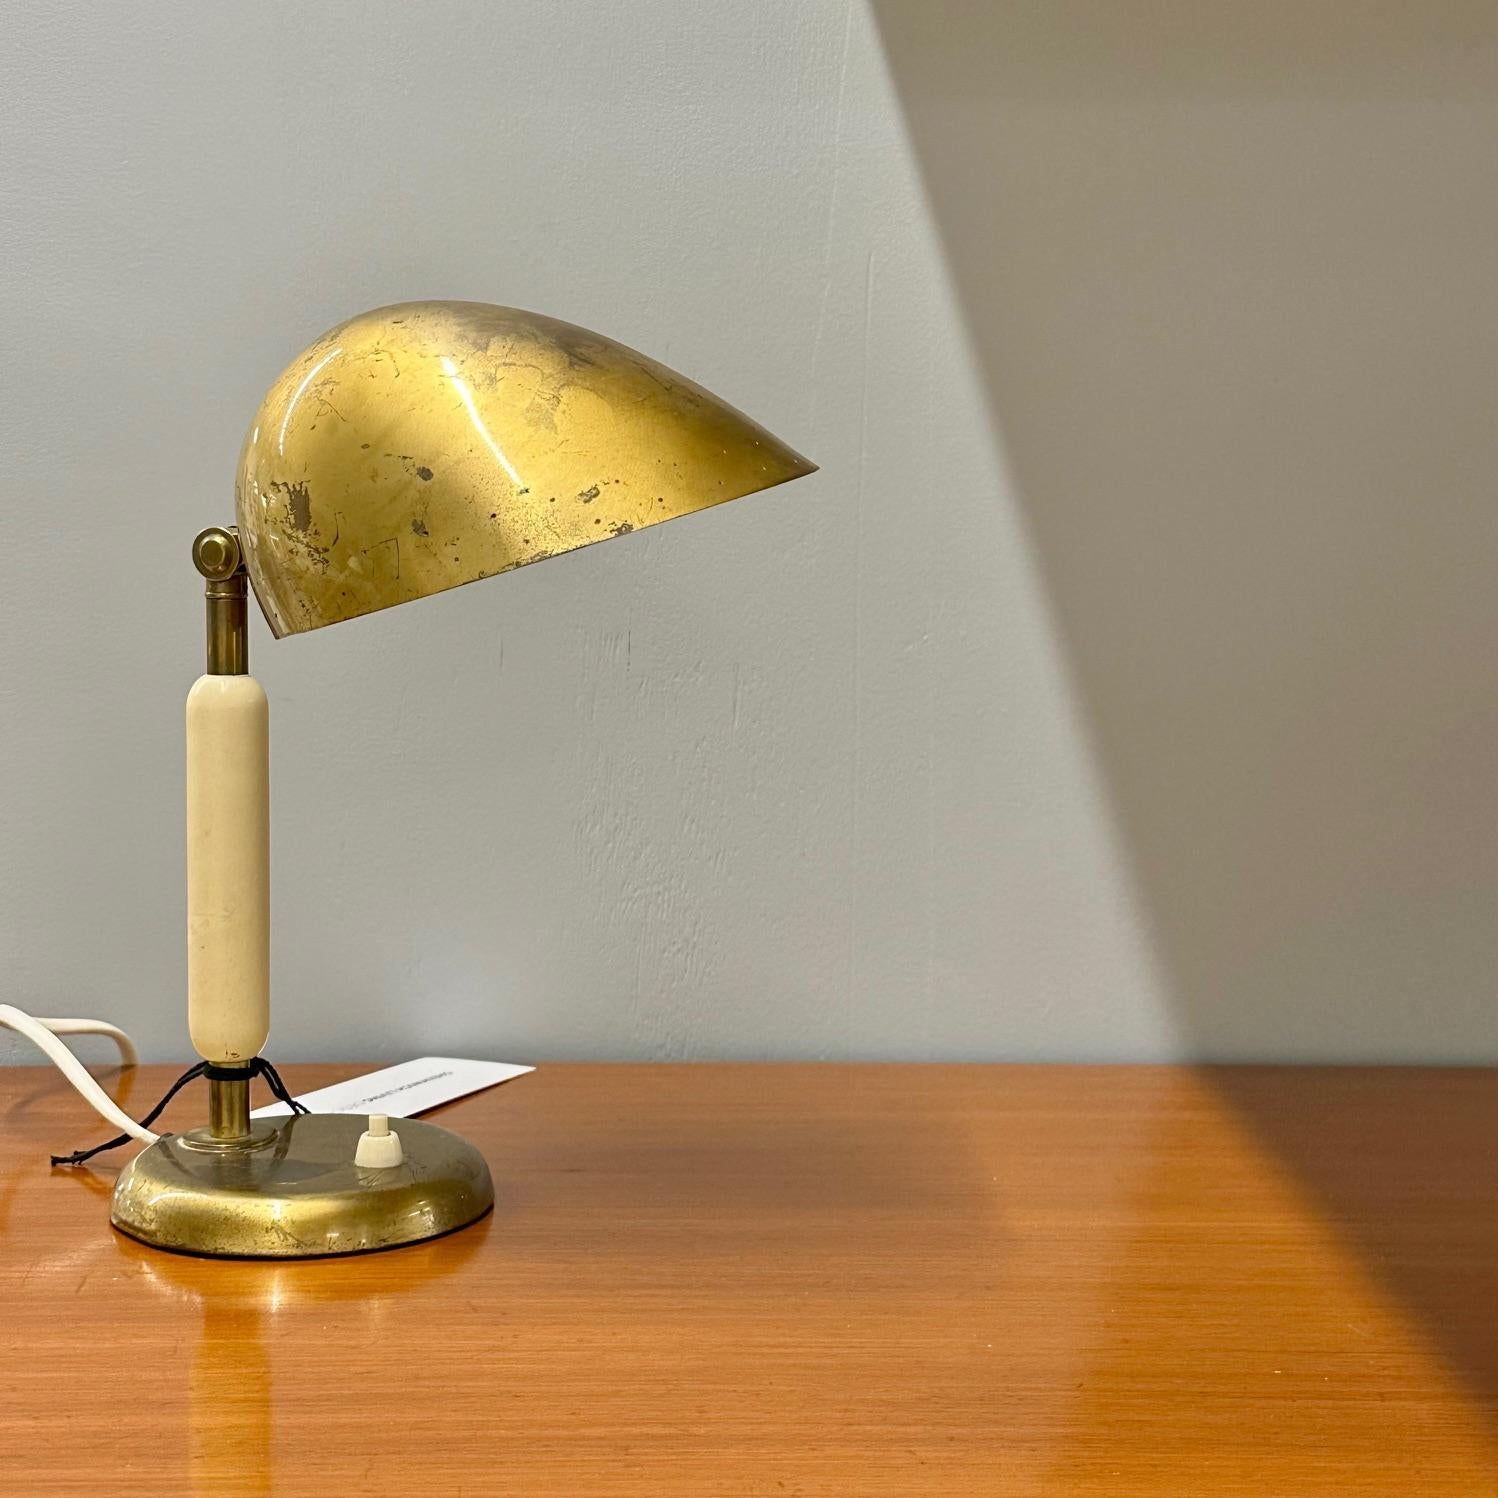 Mid-century modern swedish table or desk lamp designed by Harald Notini (Sweden, 1879-1959) for Arvid Böhlmarks Lampfabrik in Sweden circa 1930/40s.

Heavily patinated perforated brass shade and brass base. The fixture body is is a beige lacquered